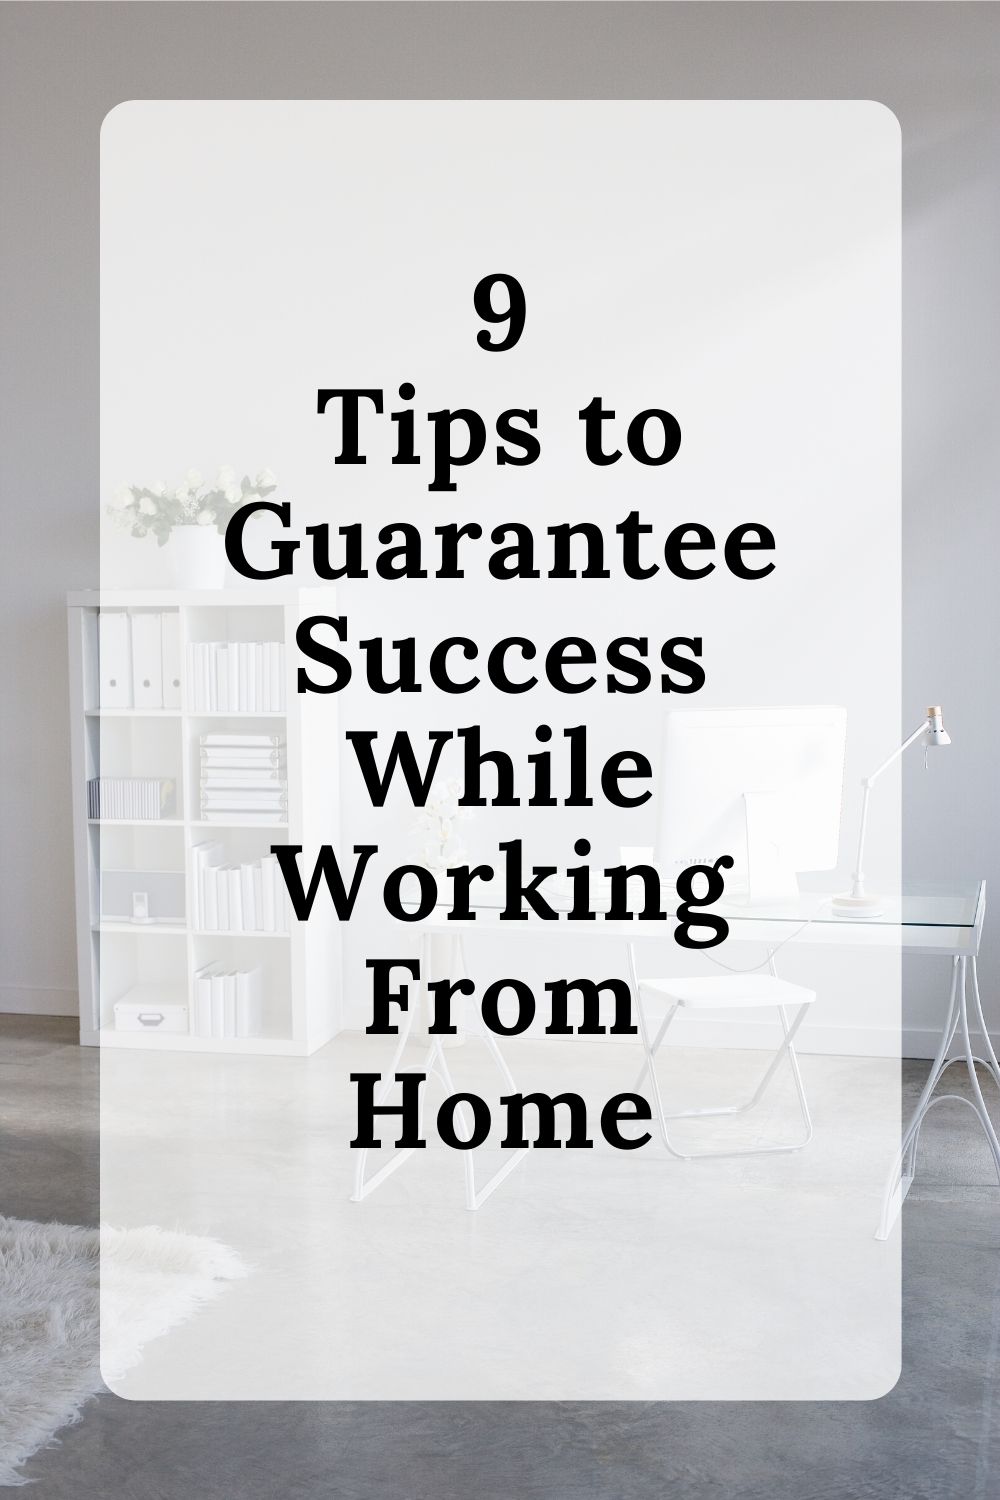 9 Tips to Guarantee Success While Working From Home